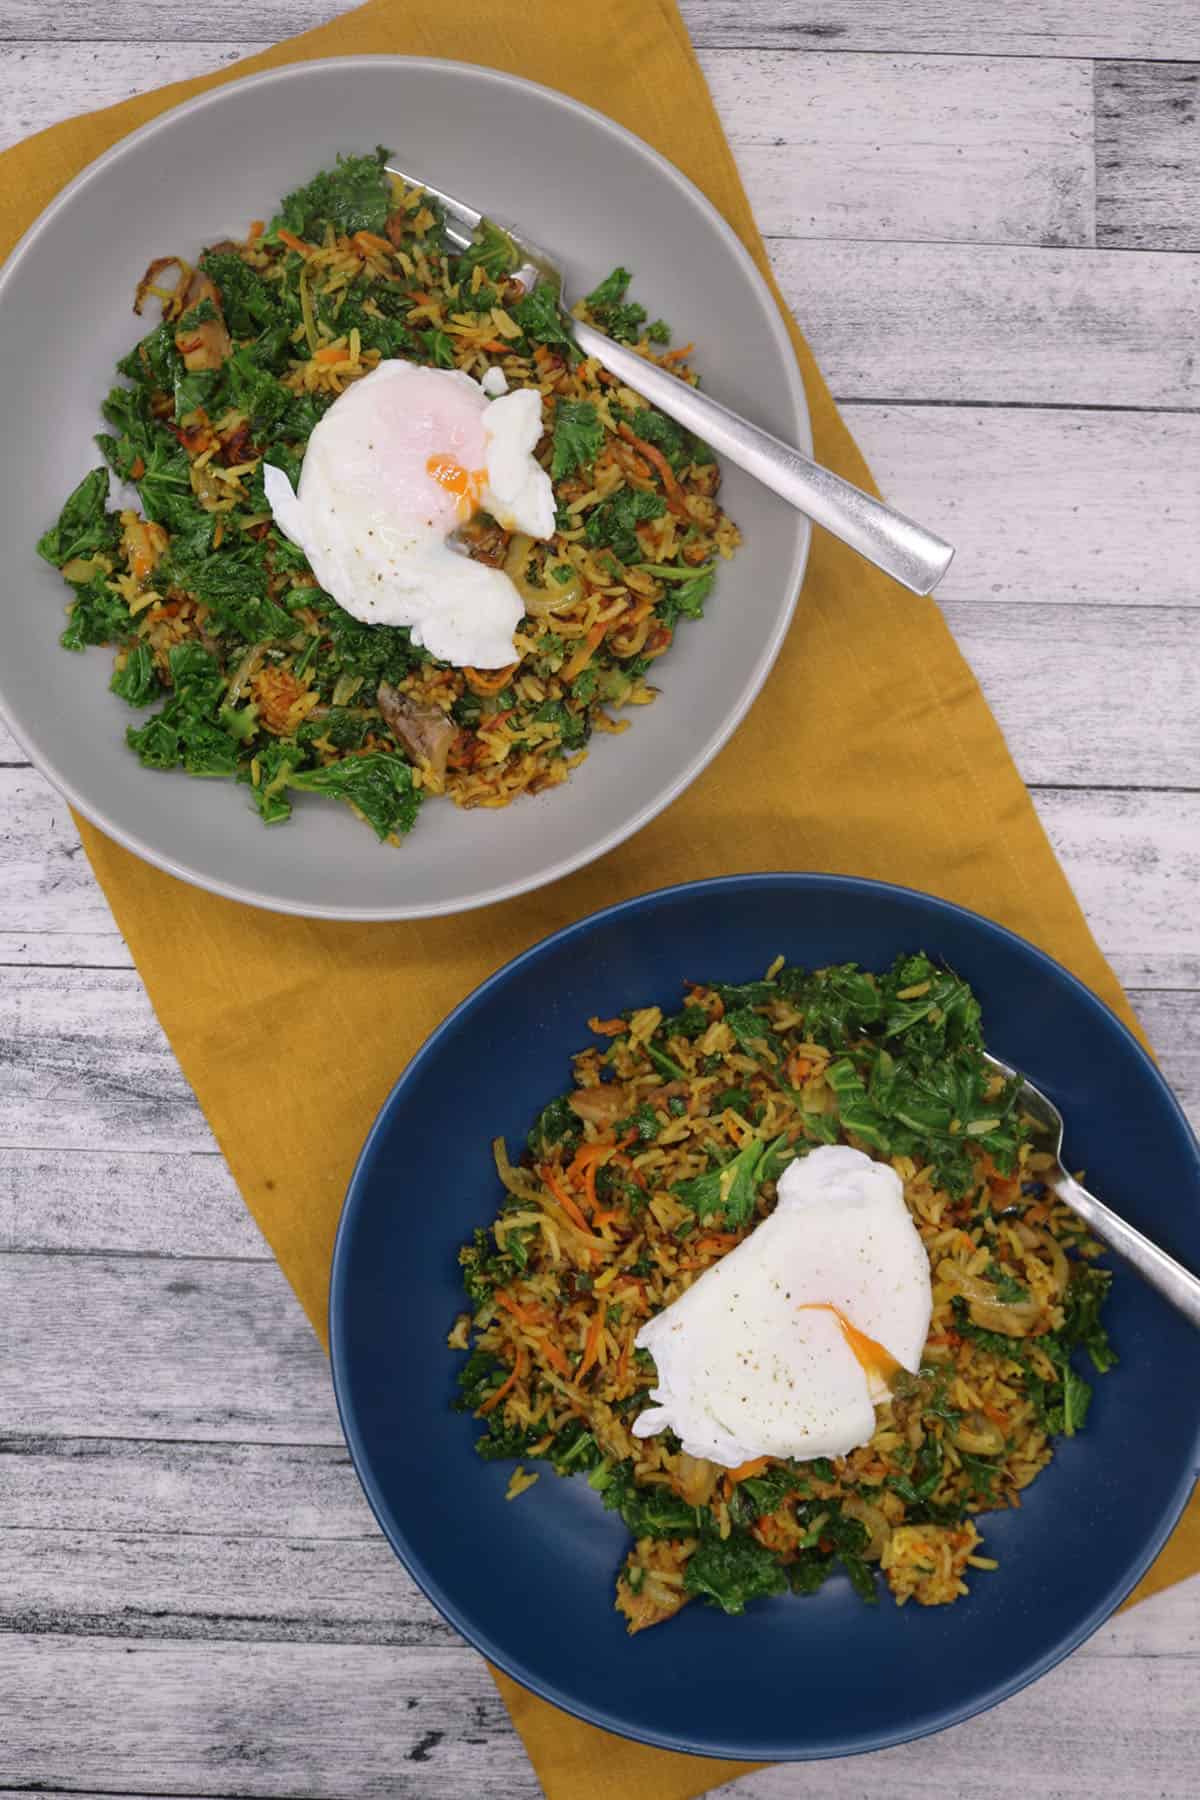 Spiced kipper fried rice topped with poached egg in blue and grey bowls sitting on yellow napkin with fork